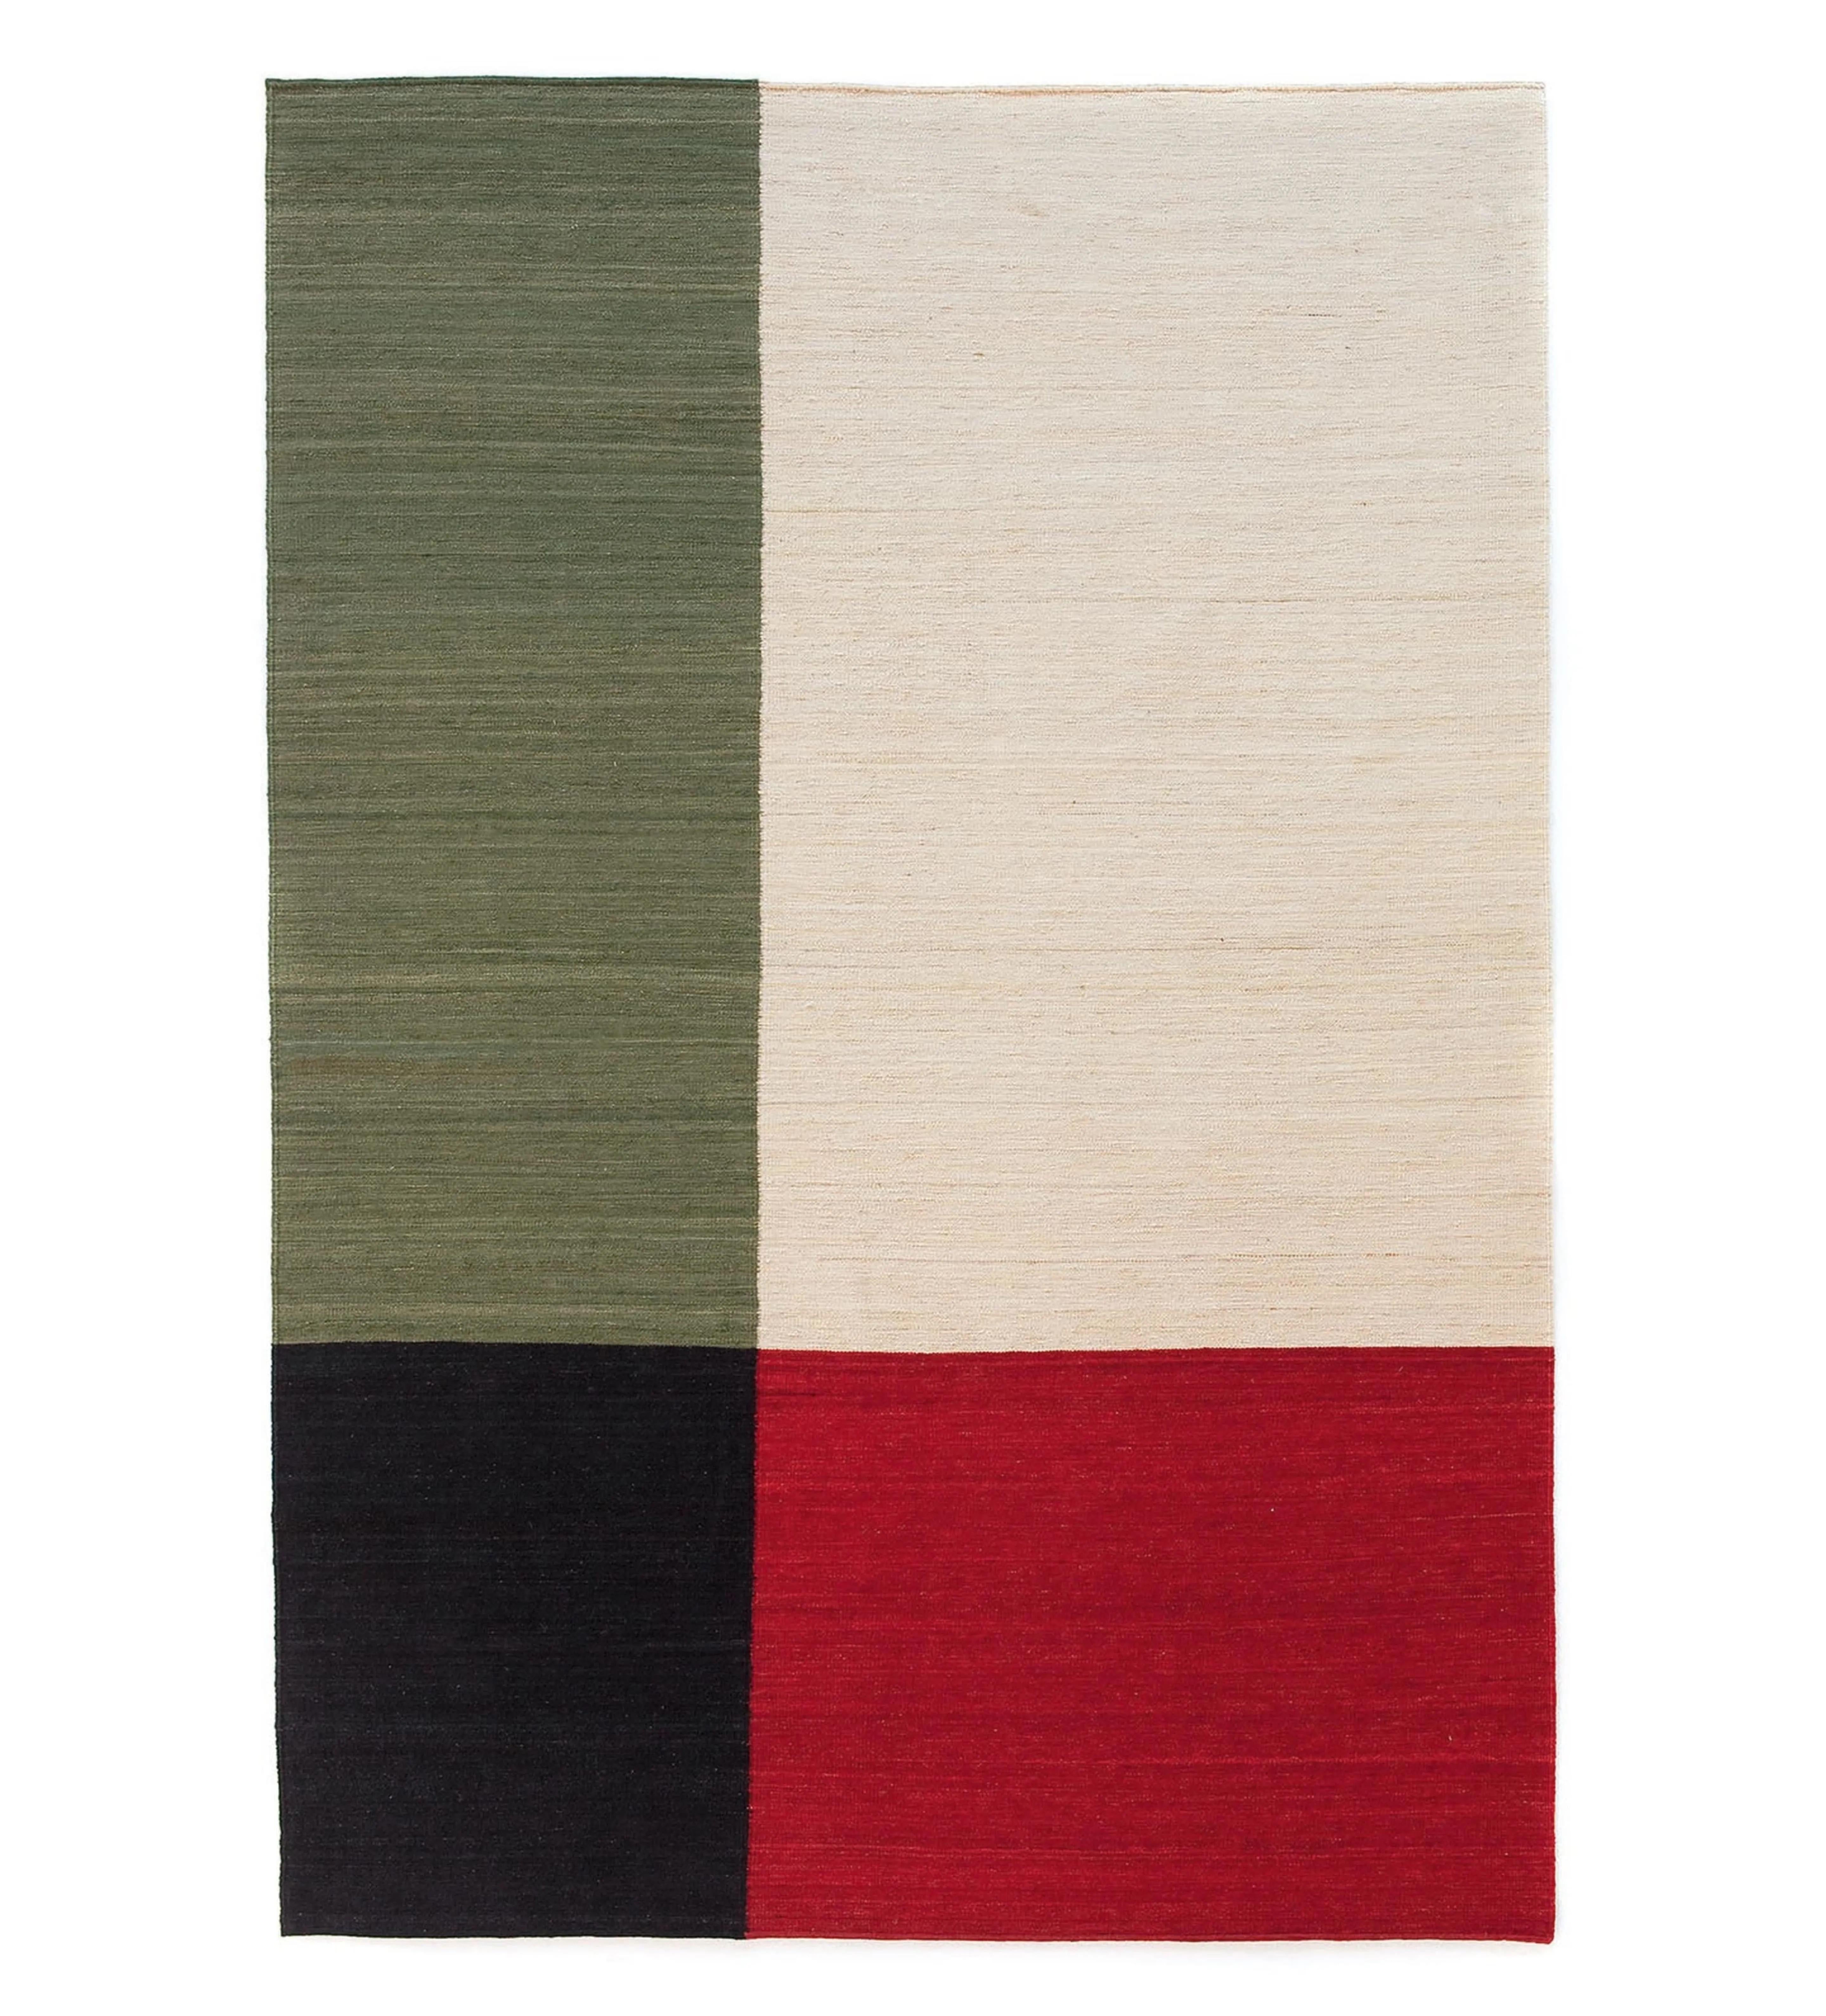 Wool 'Mélange Color 1' Hand-Loomed Rug by Sybilla for Nanimarquina For Sale